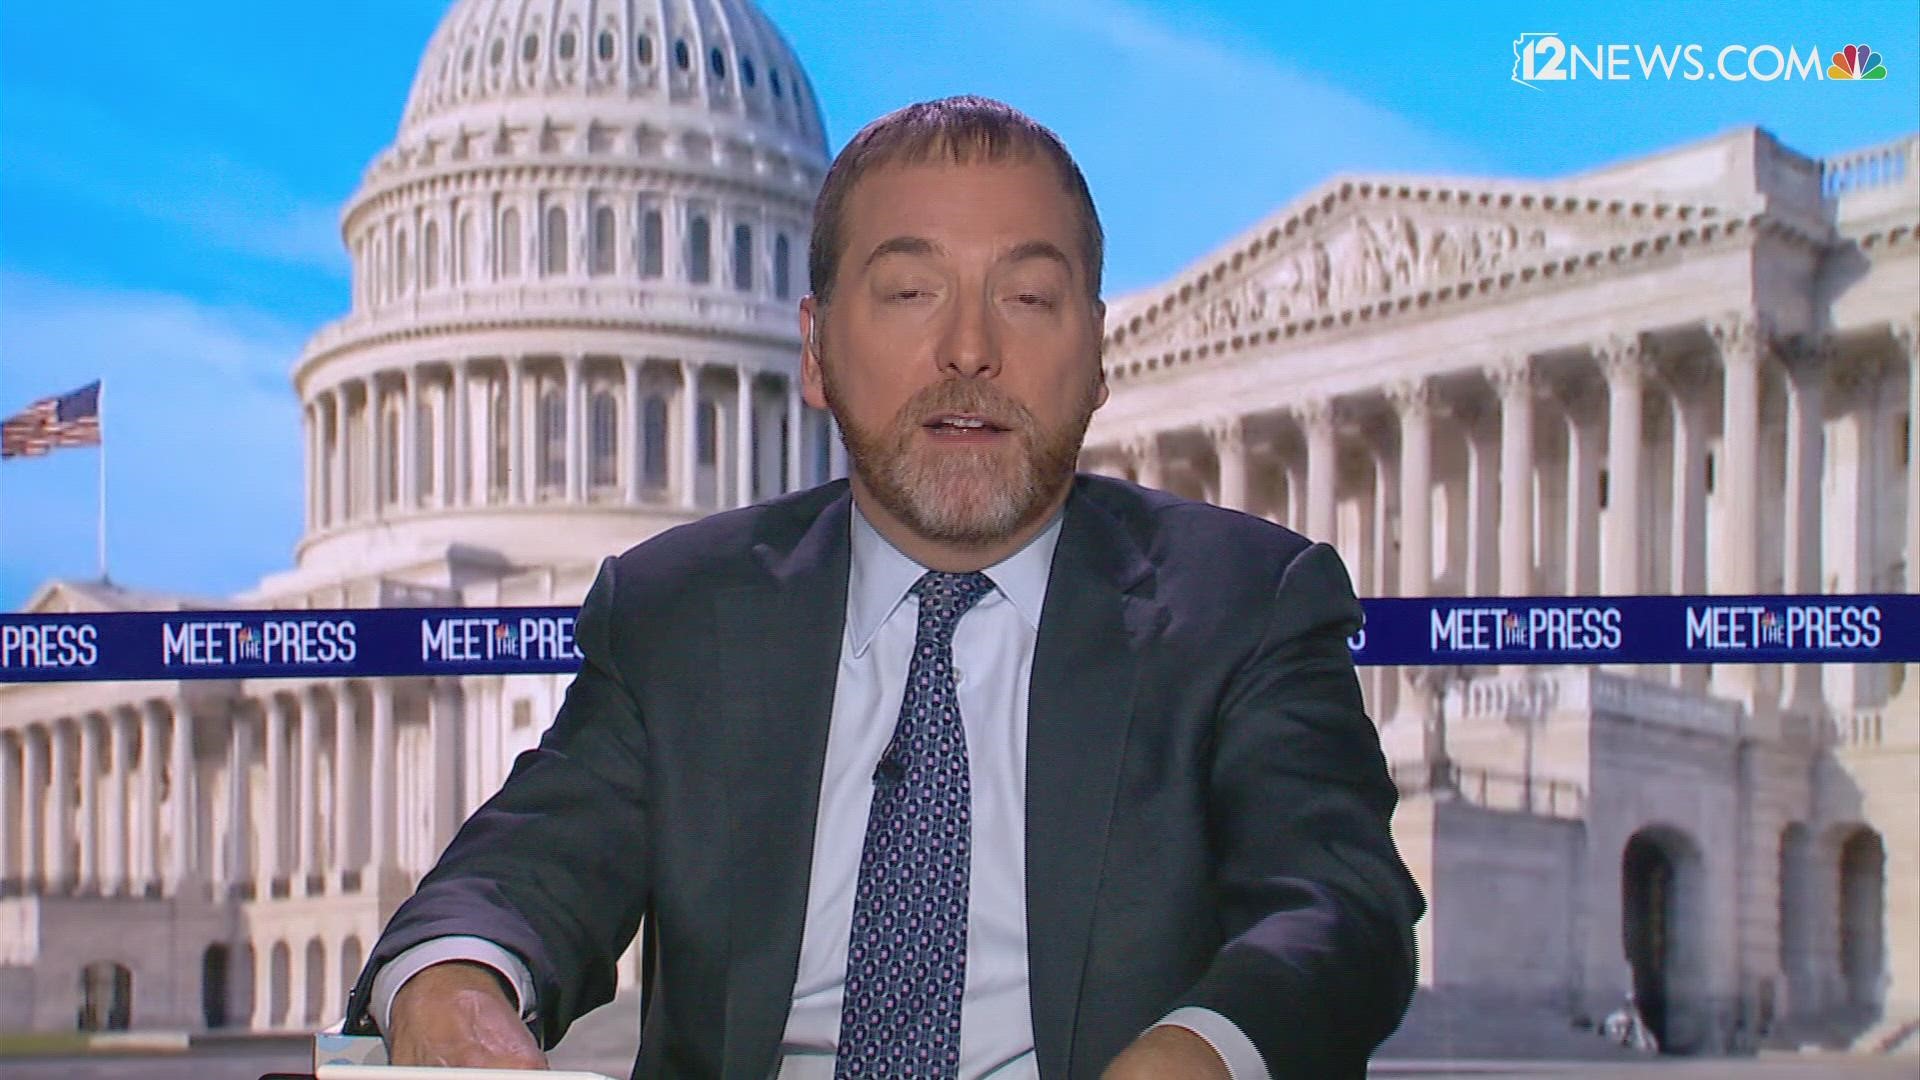 12News' Brahm Resnik asked 'Meet the Press' moderator Chuck Todd how the Arizona Republican Party's censure of Sen. John McCain in 2014 compares to the state Democra